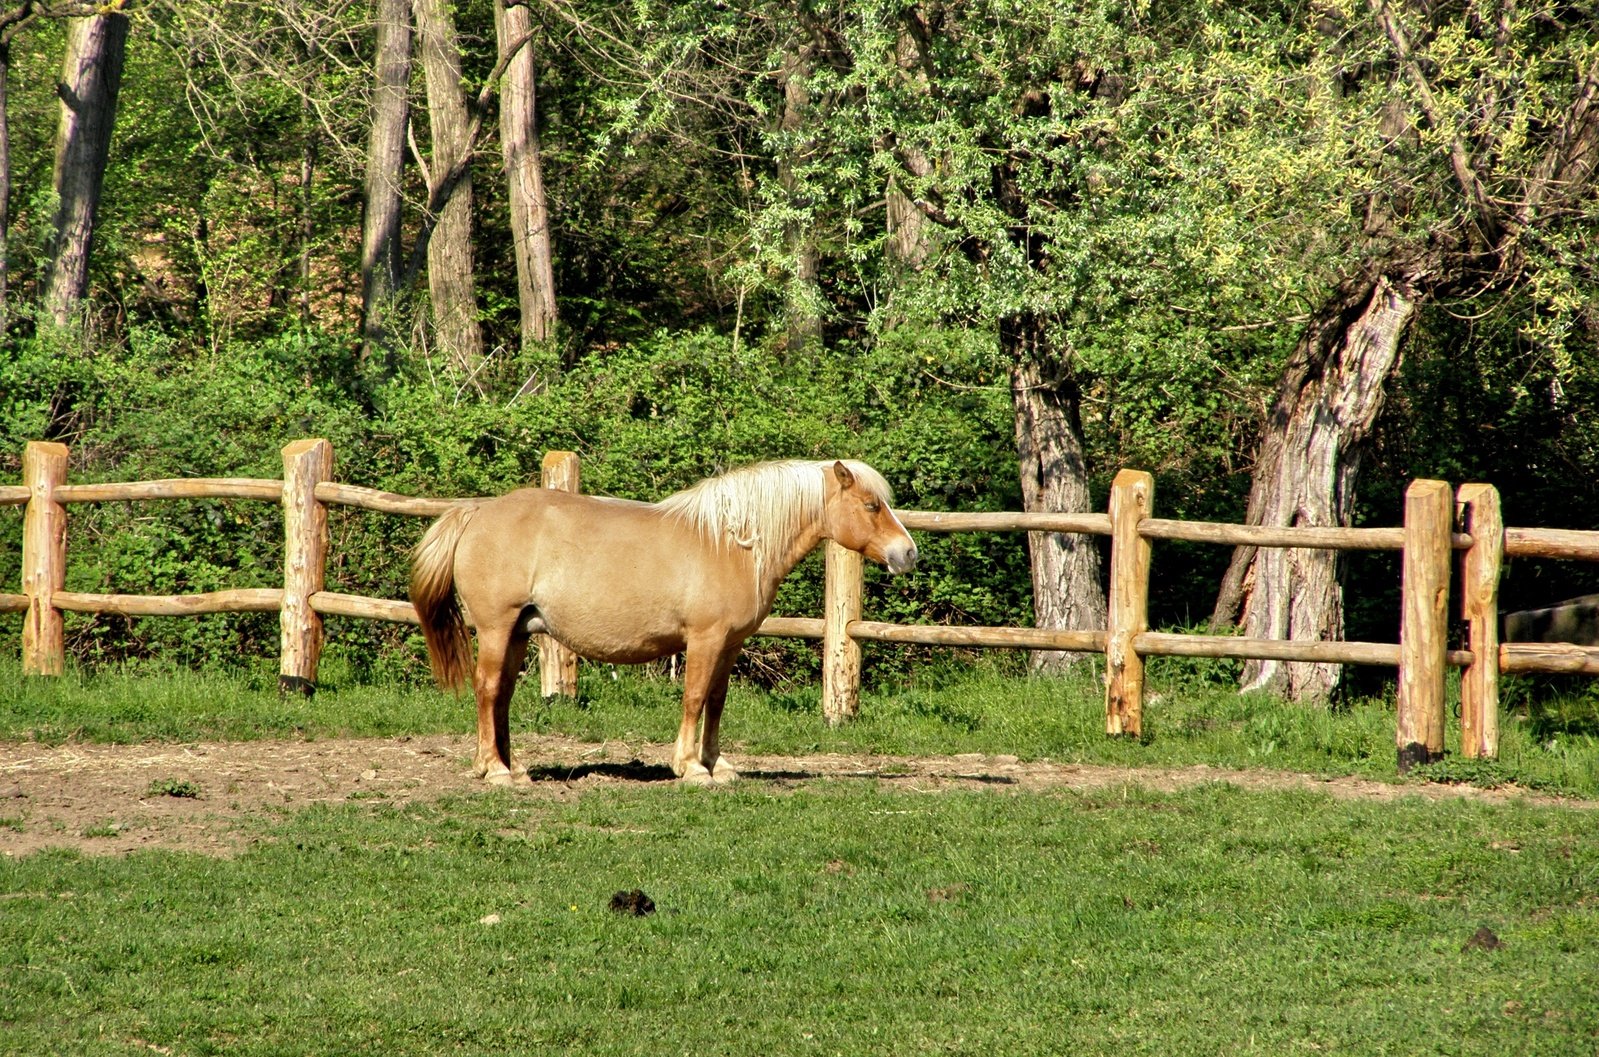 two horses in an enclosure are seen in the foreground